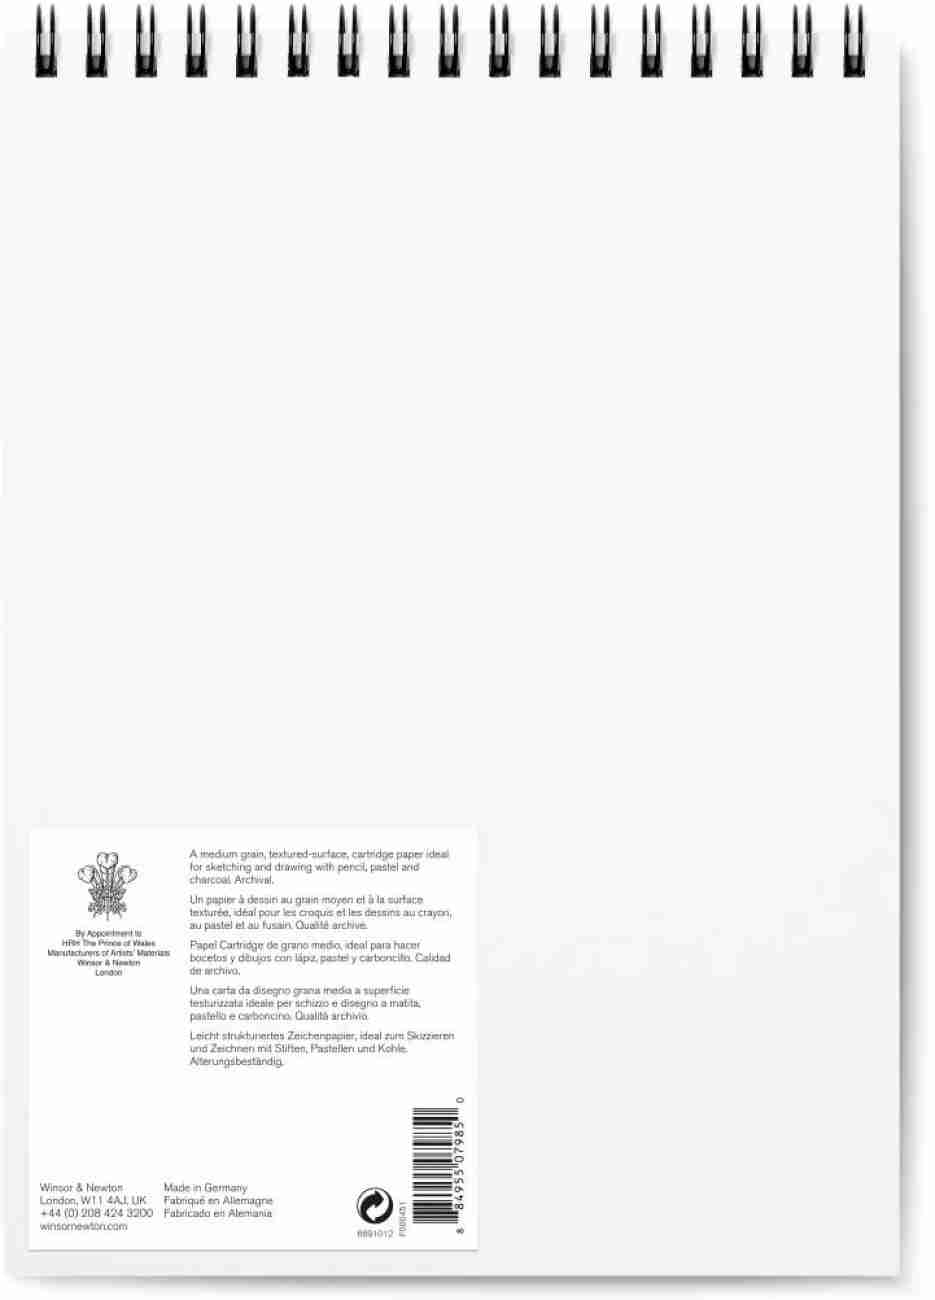 Blank White Cardstock 12 x 12 Inches | 65lb Cover (25 Sheets per Pack